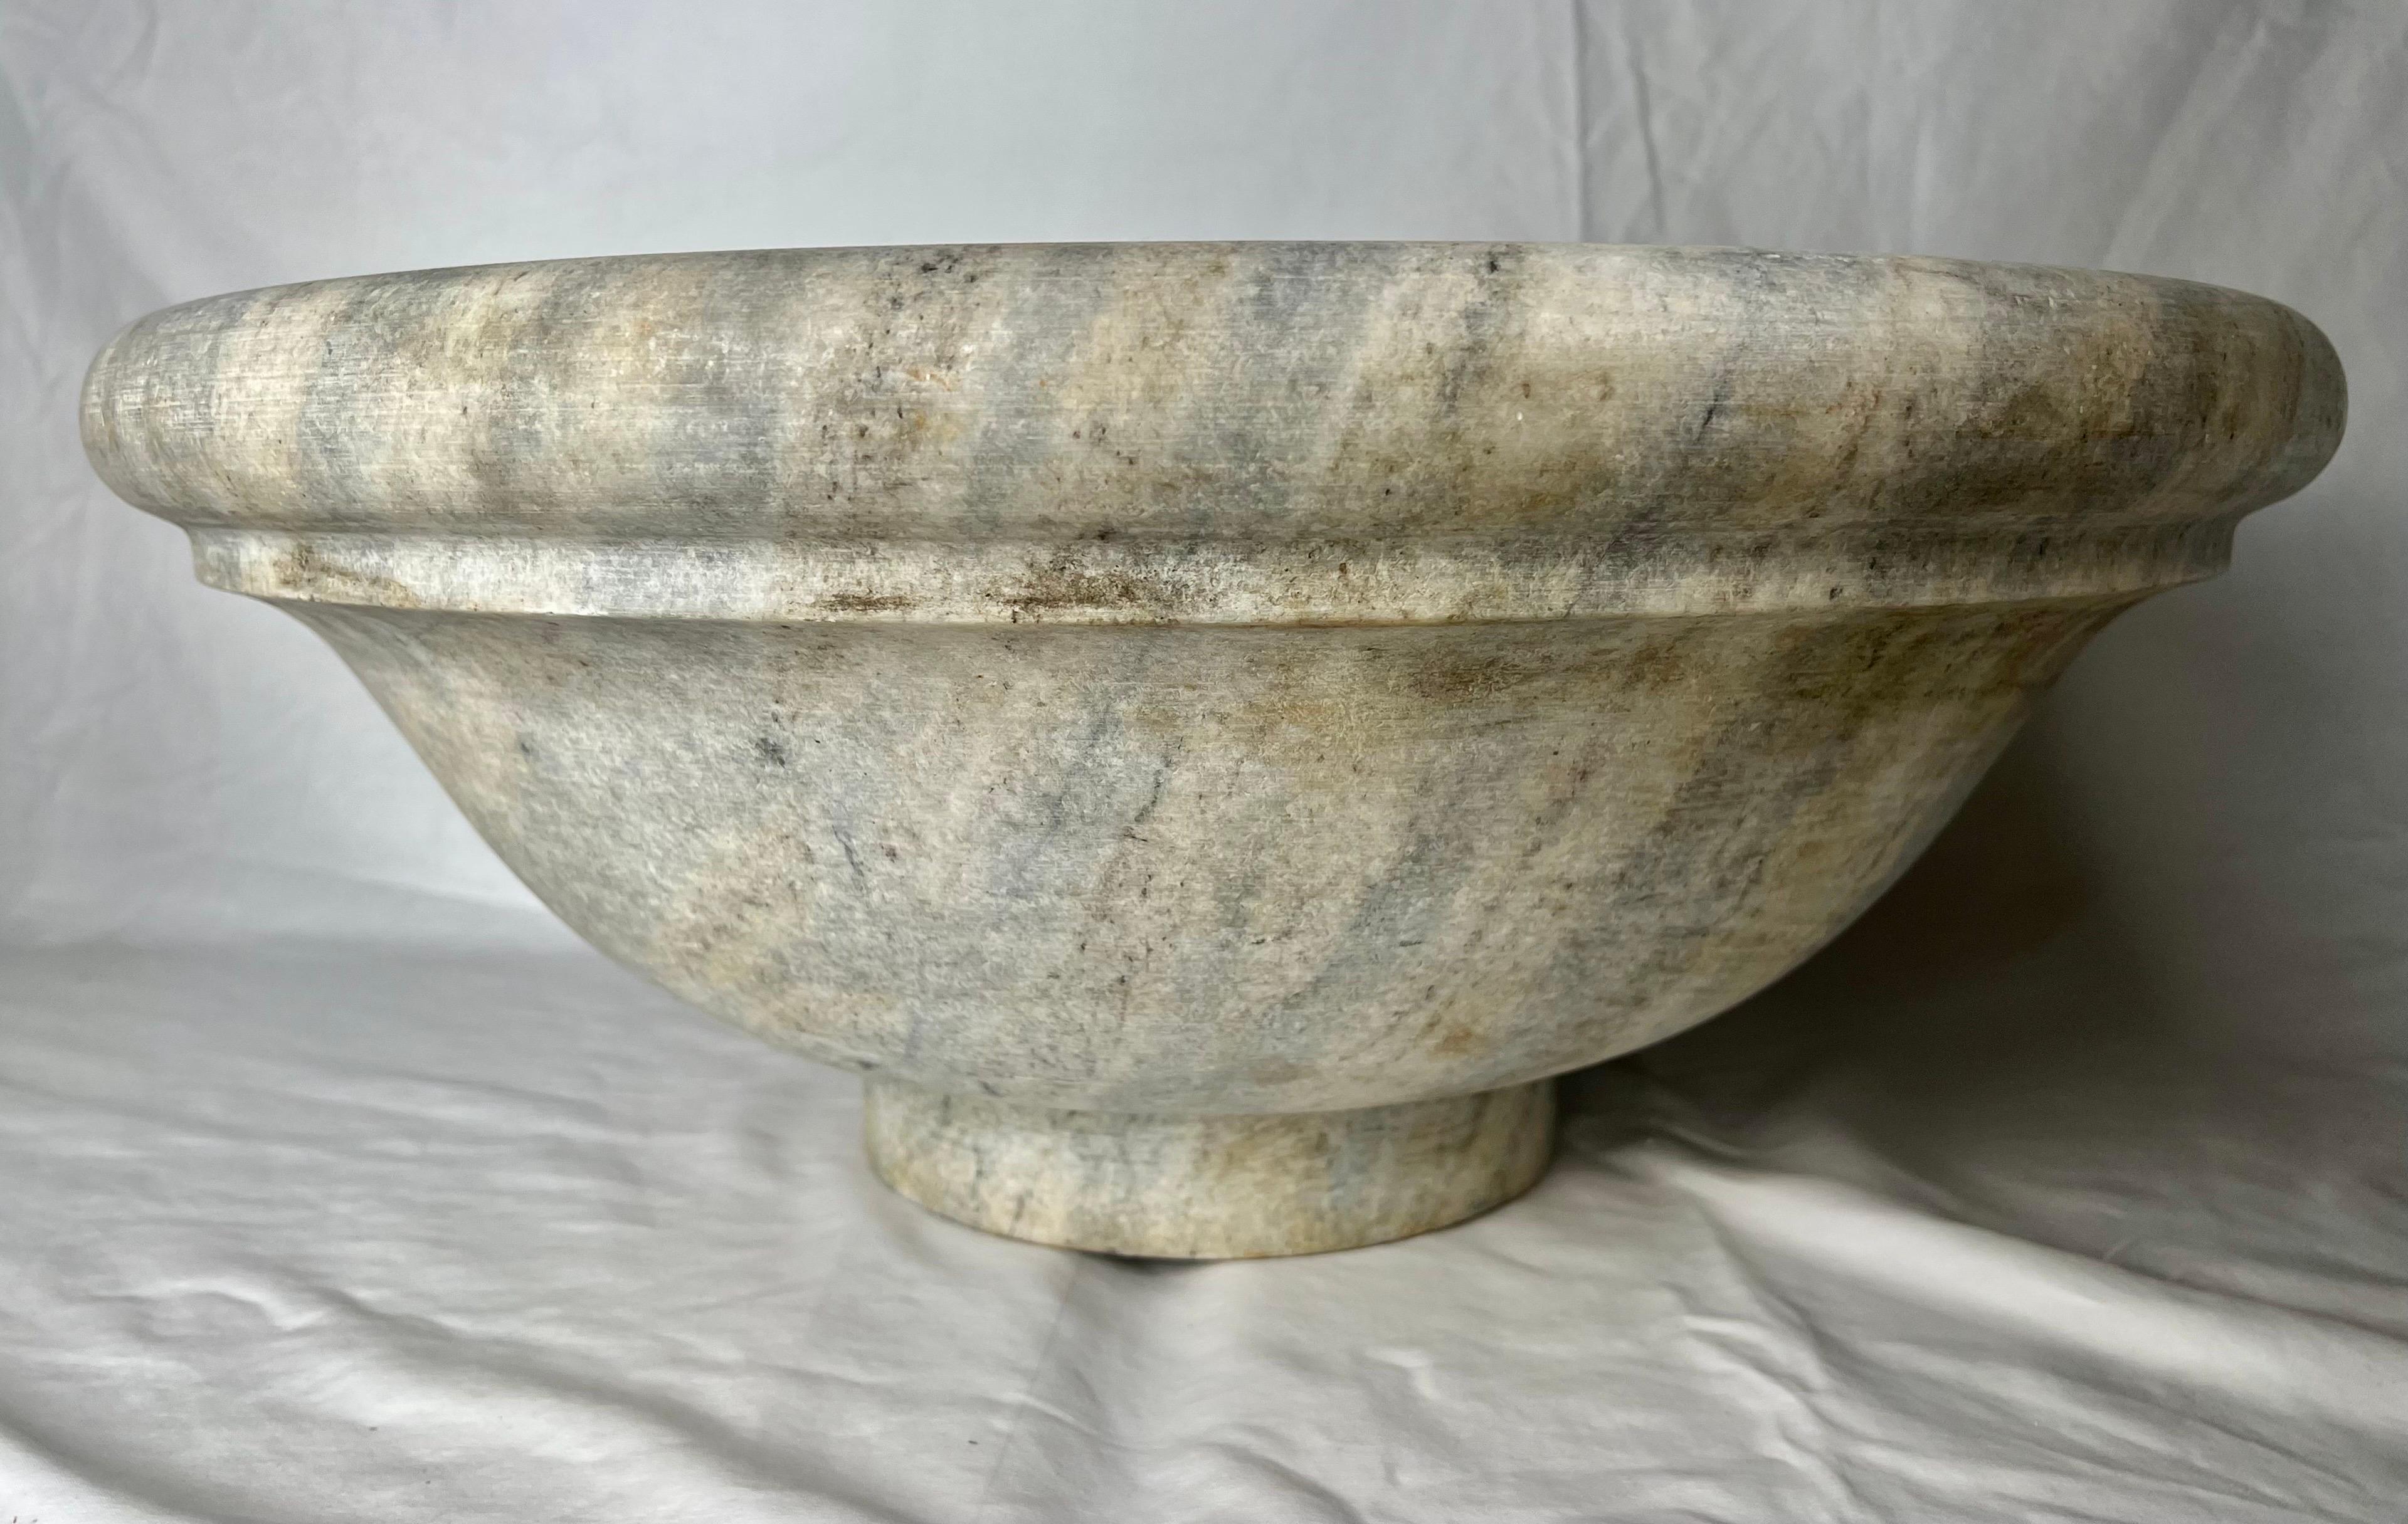 Mid 20th century classic Roman style Italian made limestone sink. There are soft shades of cream, gray, golds, and more. A hole has already been drilled for convenience.